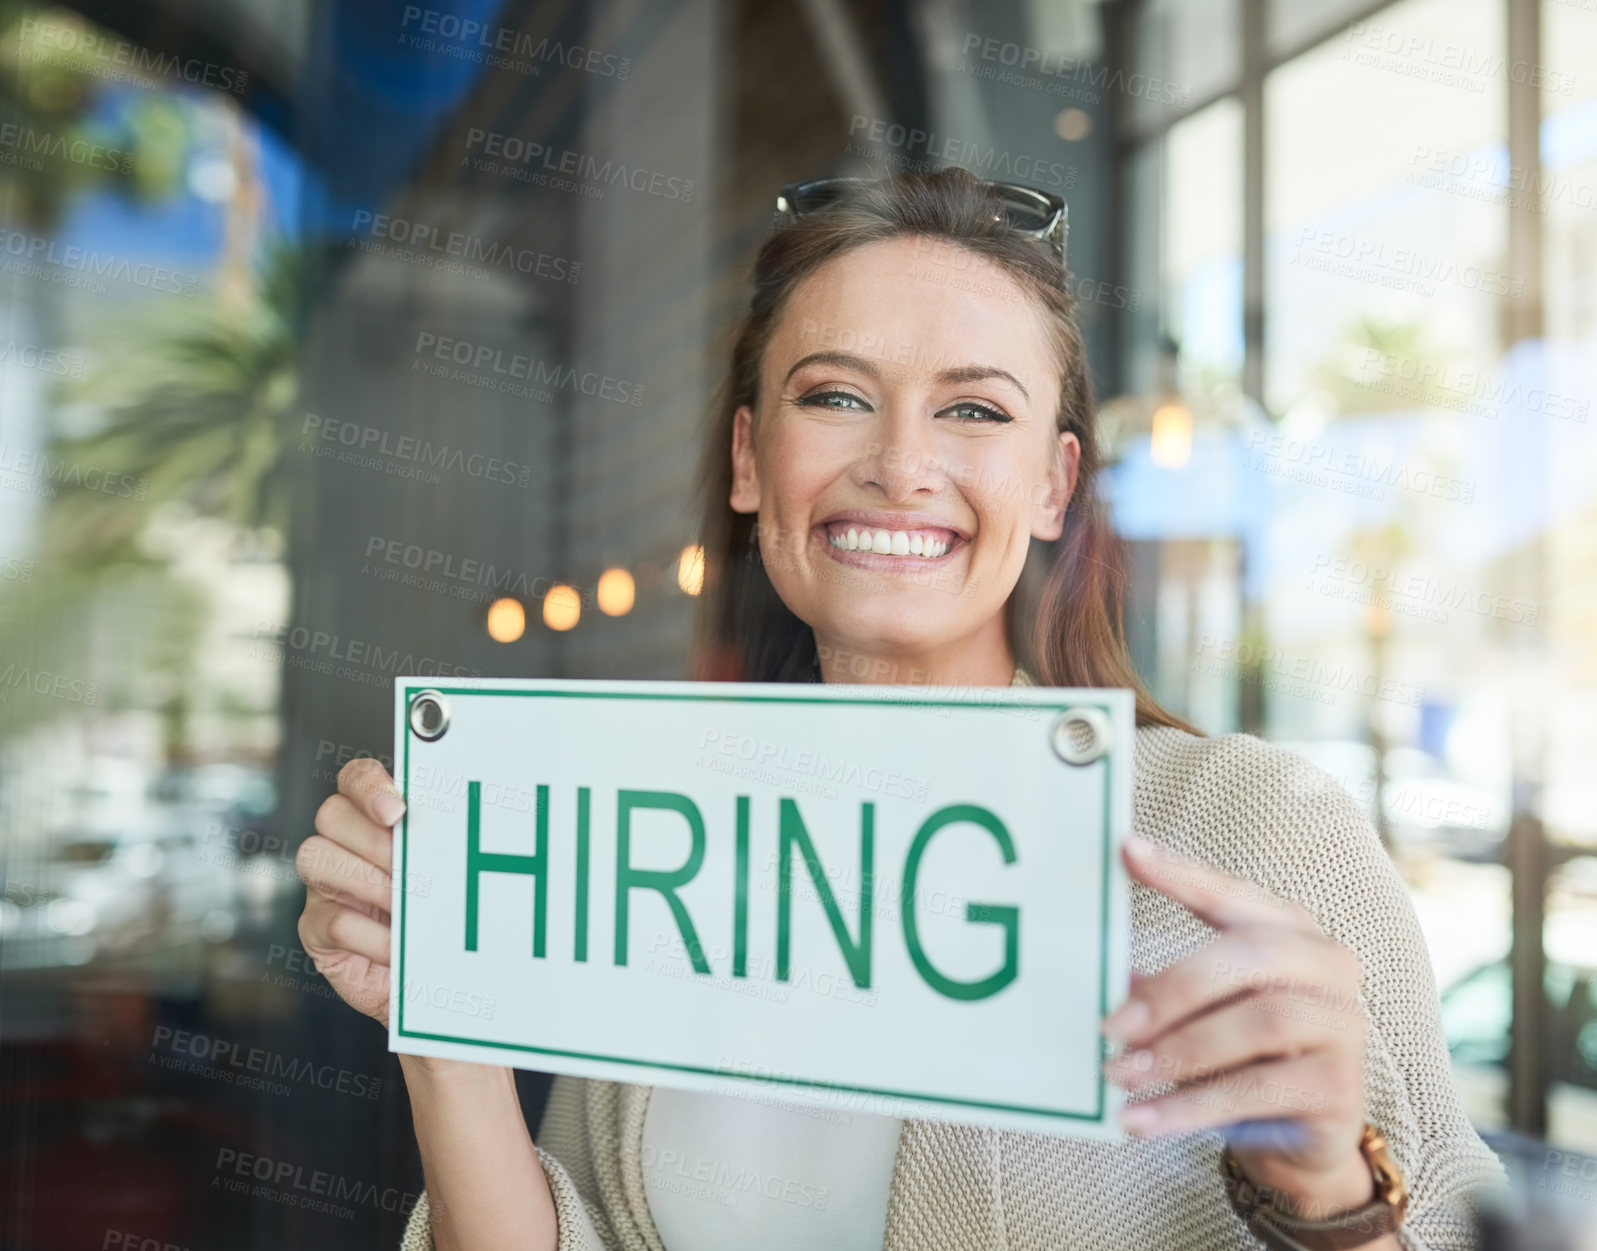 Buy stock photo Portrait of a young entrepreneur holding a “hiring” sign in her business